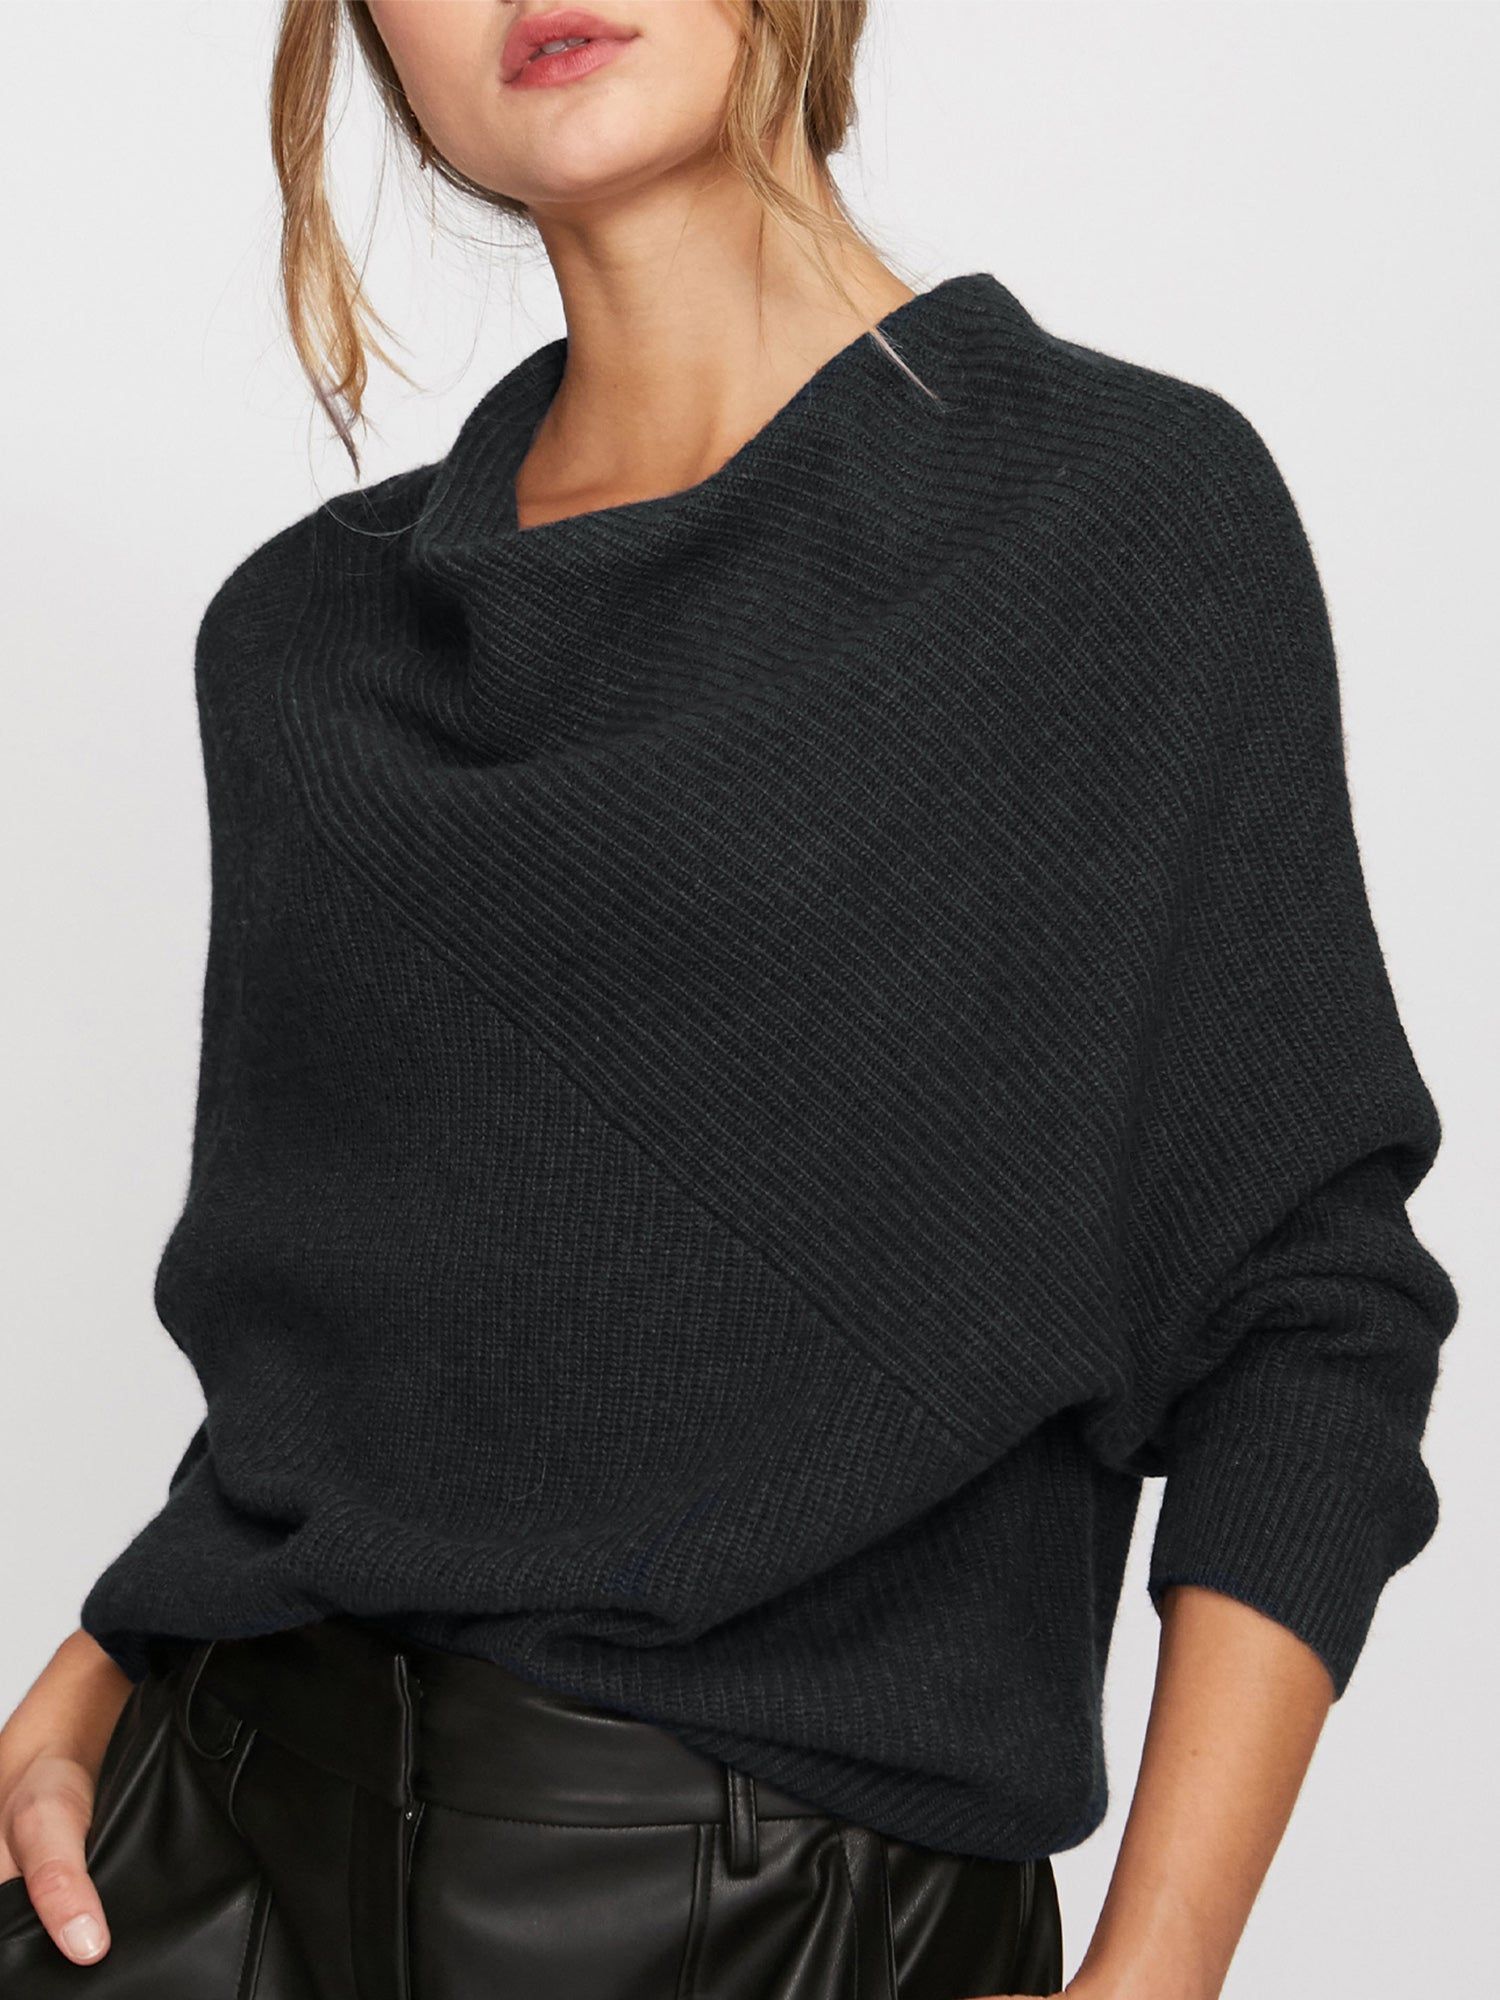 Cowl Neck Sweaters